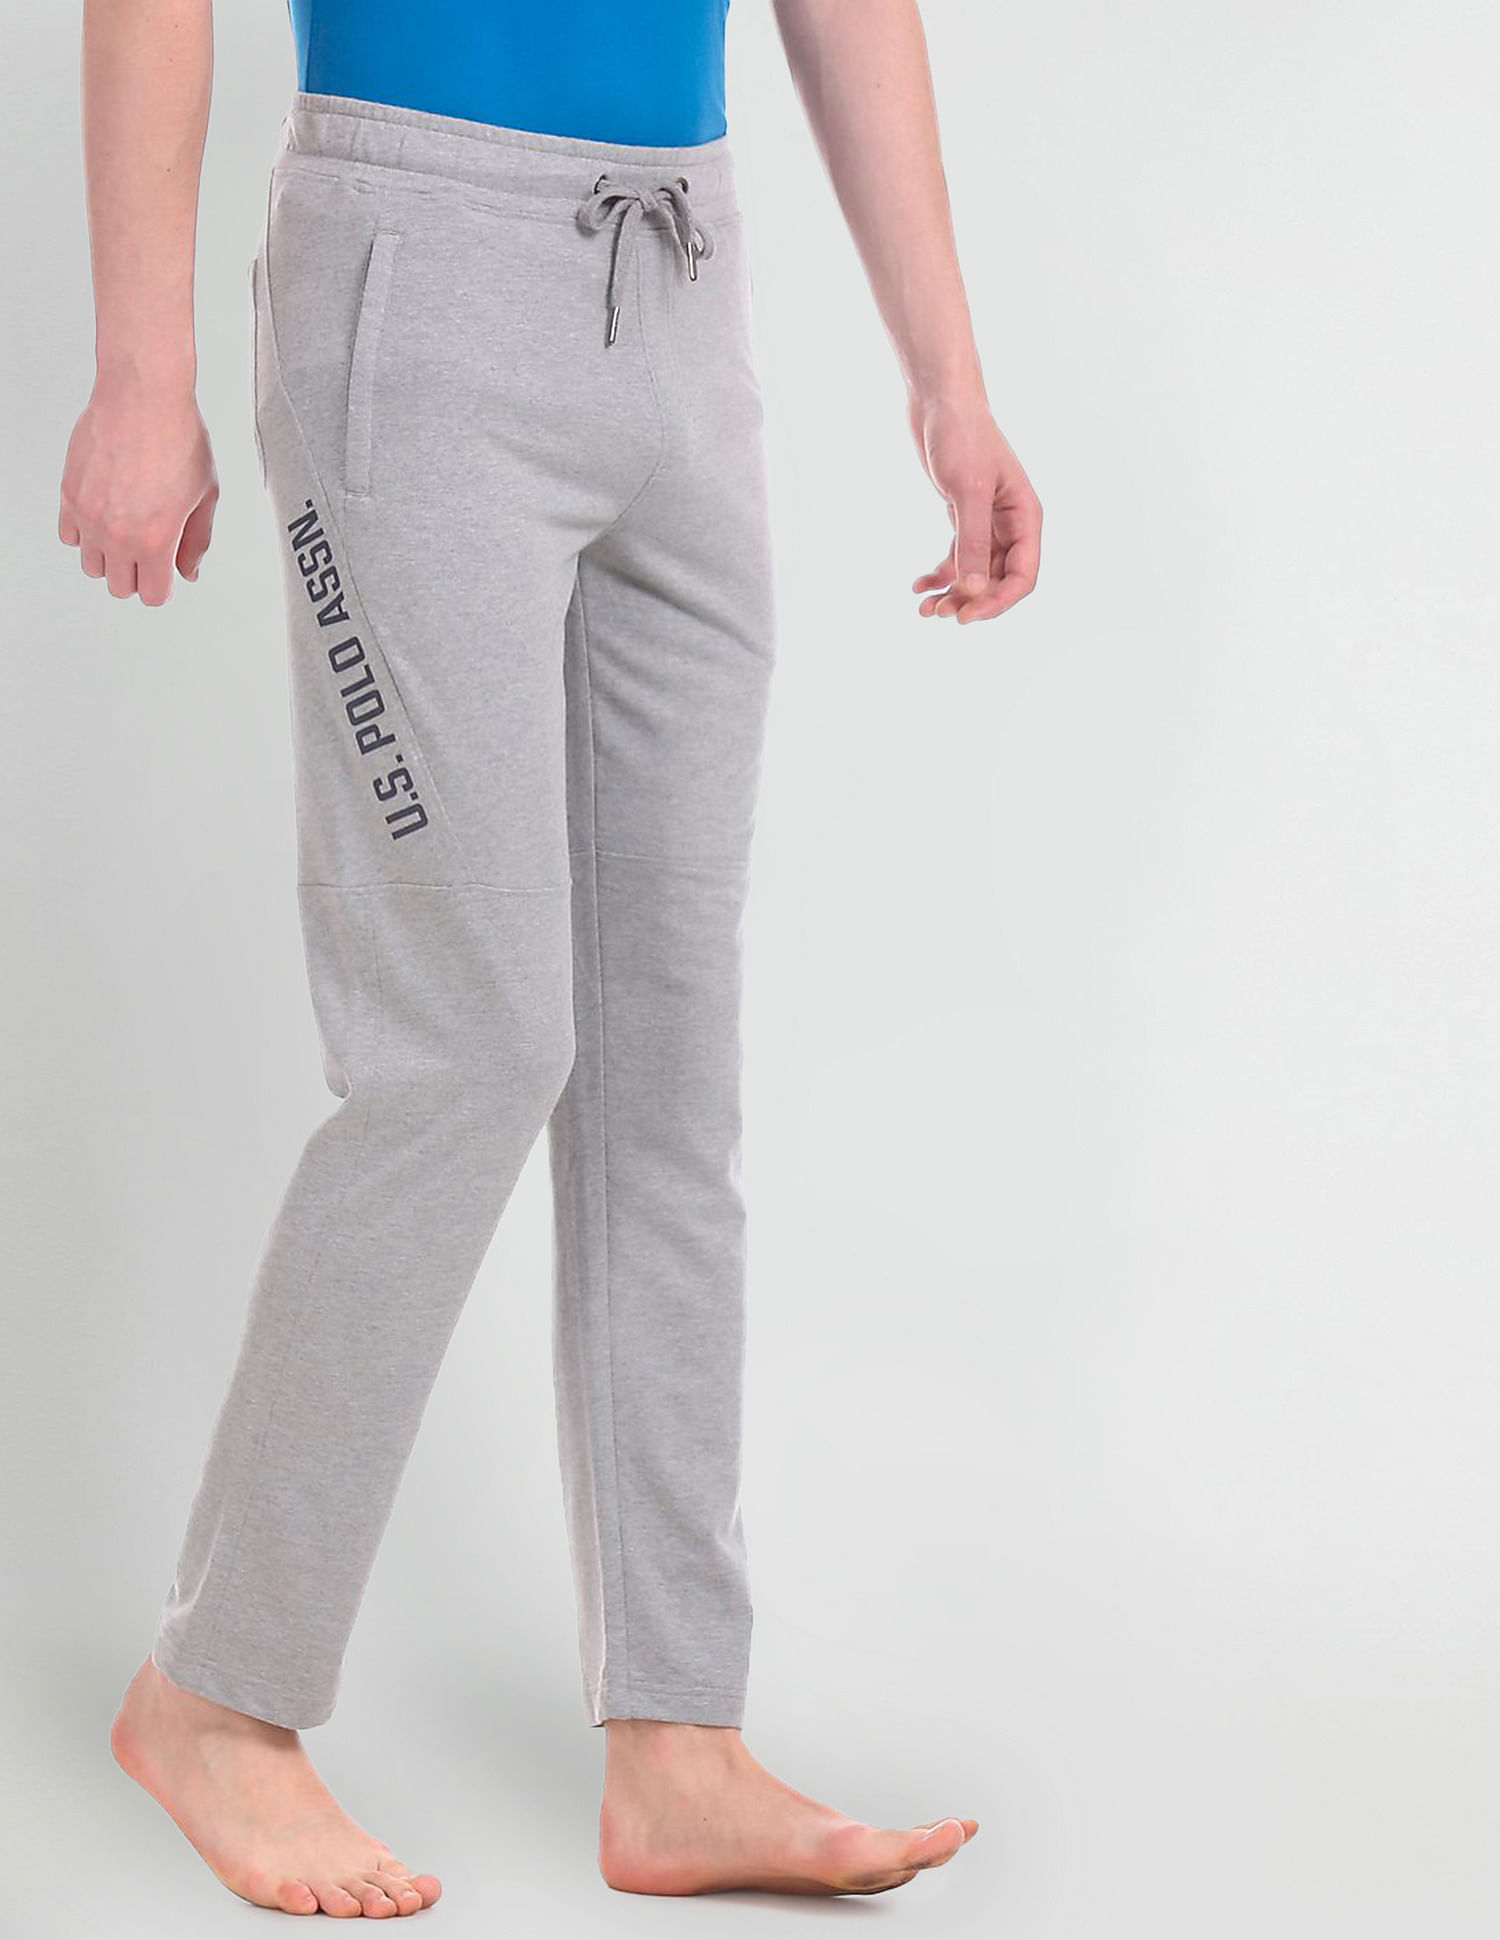 US POLO ASSN TRACK PANTS FULL REVIEW [US POLO TRACK PANTS UNBLOCK] 